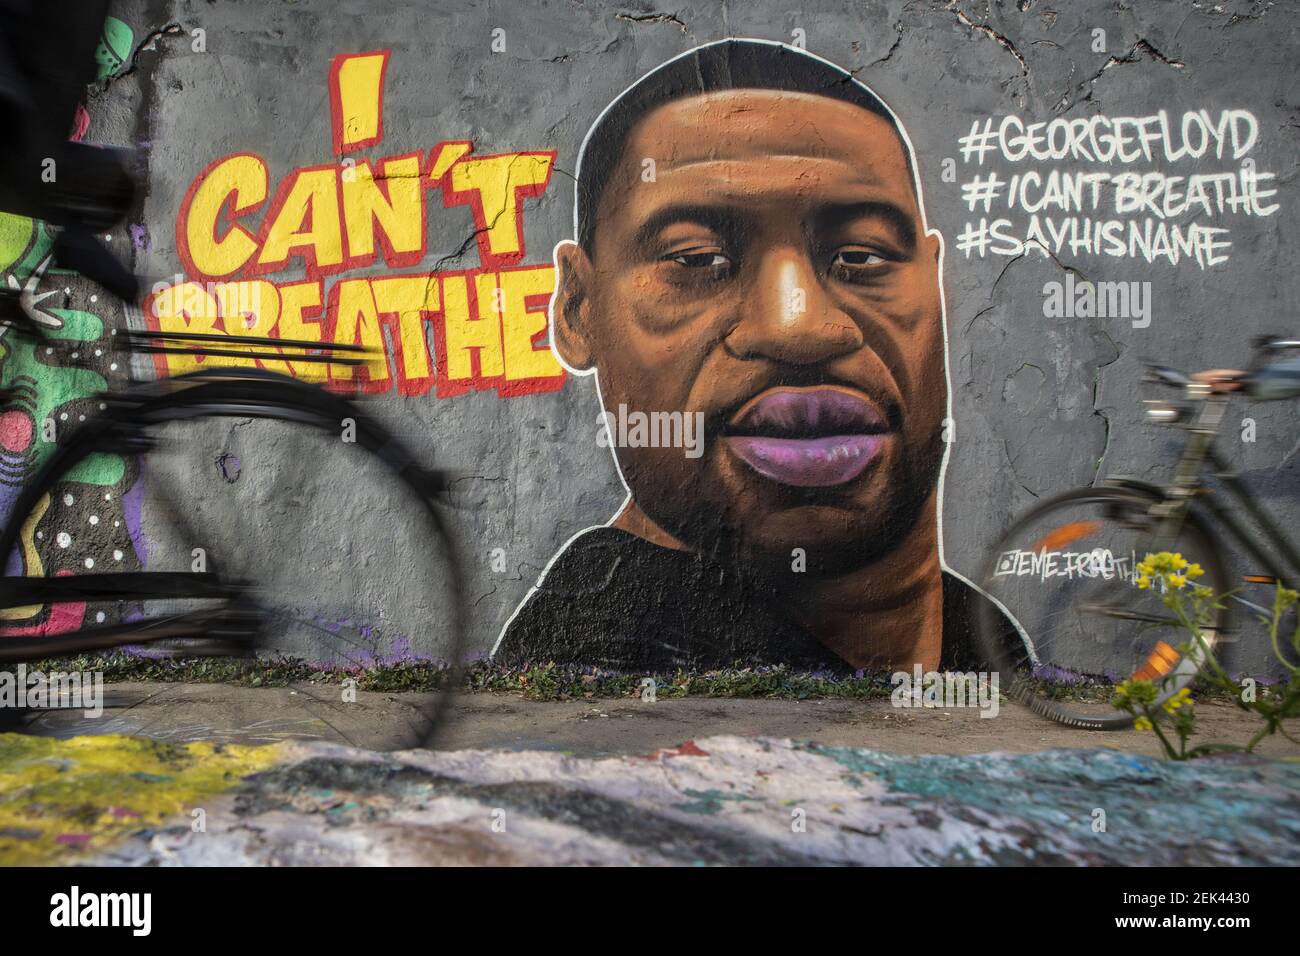 A mural of George Floyd painted by the artist eme freethinker on a wall at  Mauerpark in Berlin, Germany, May 30, 2020. The 46-year-old  African-American, died on May 25, 2020 after a